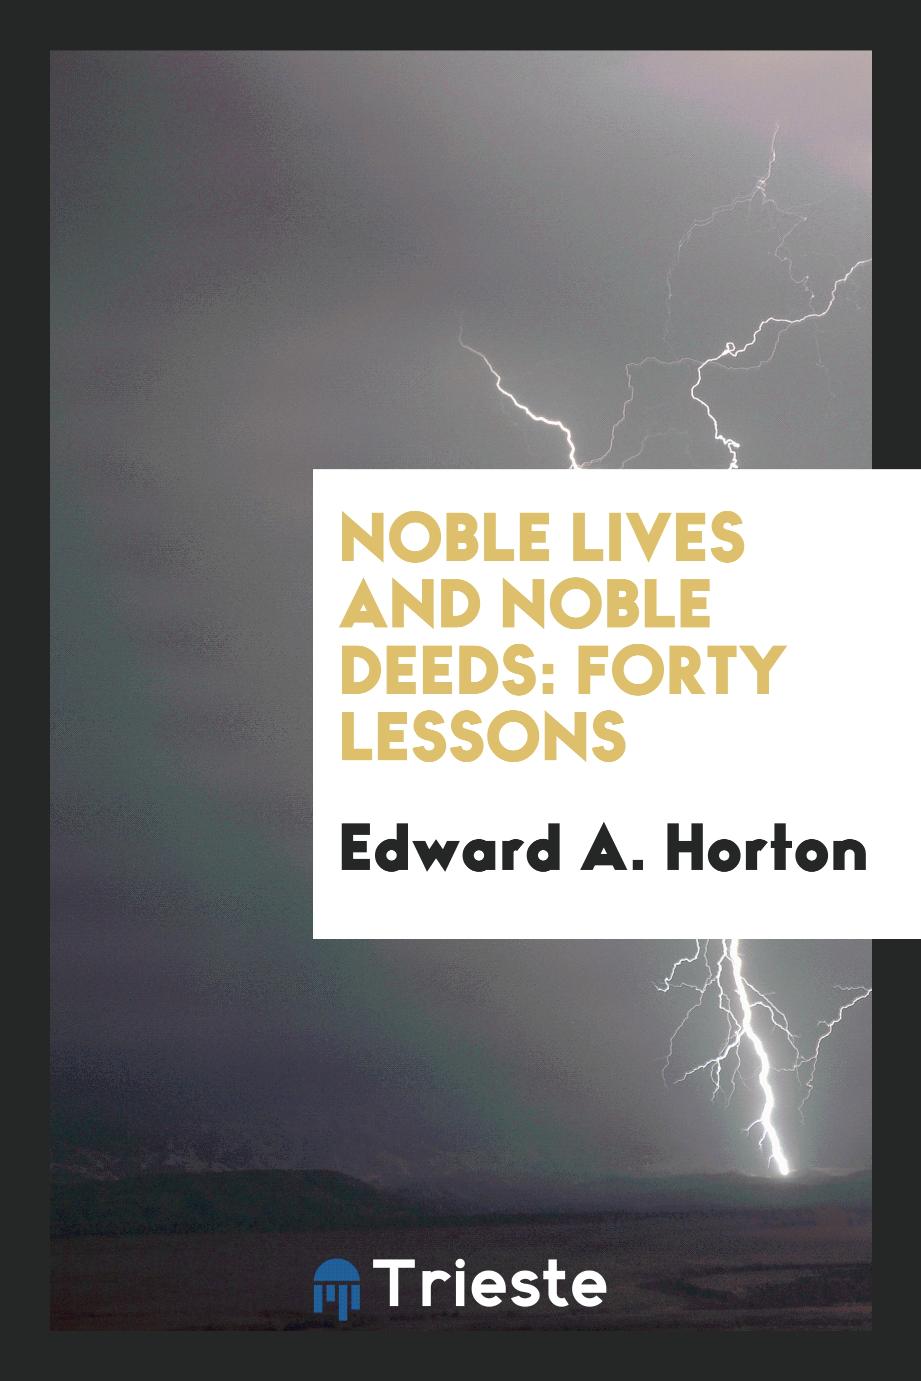 Noble Lives and Noble Deeds: Forty Lessons